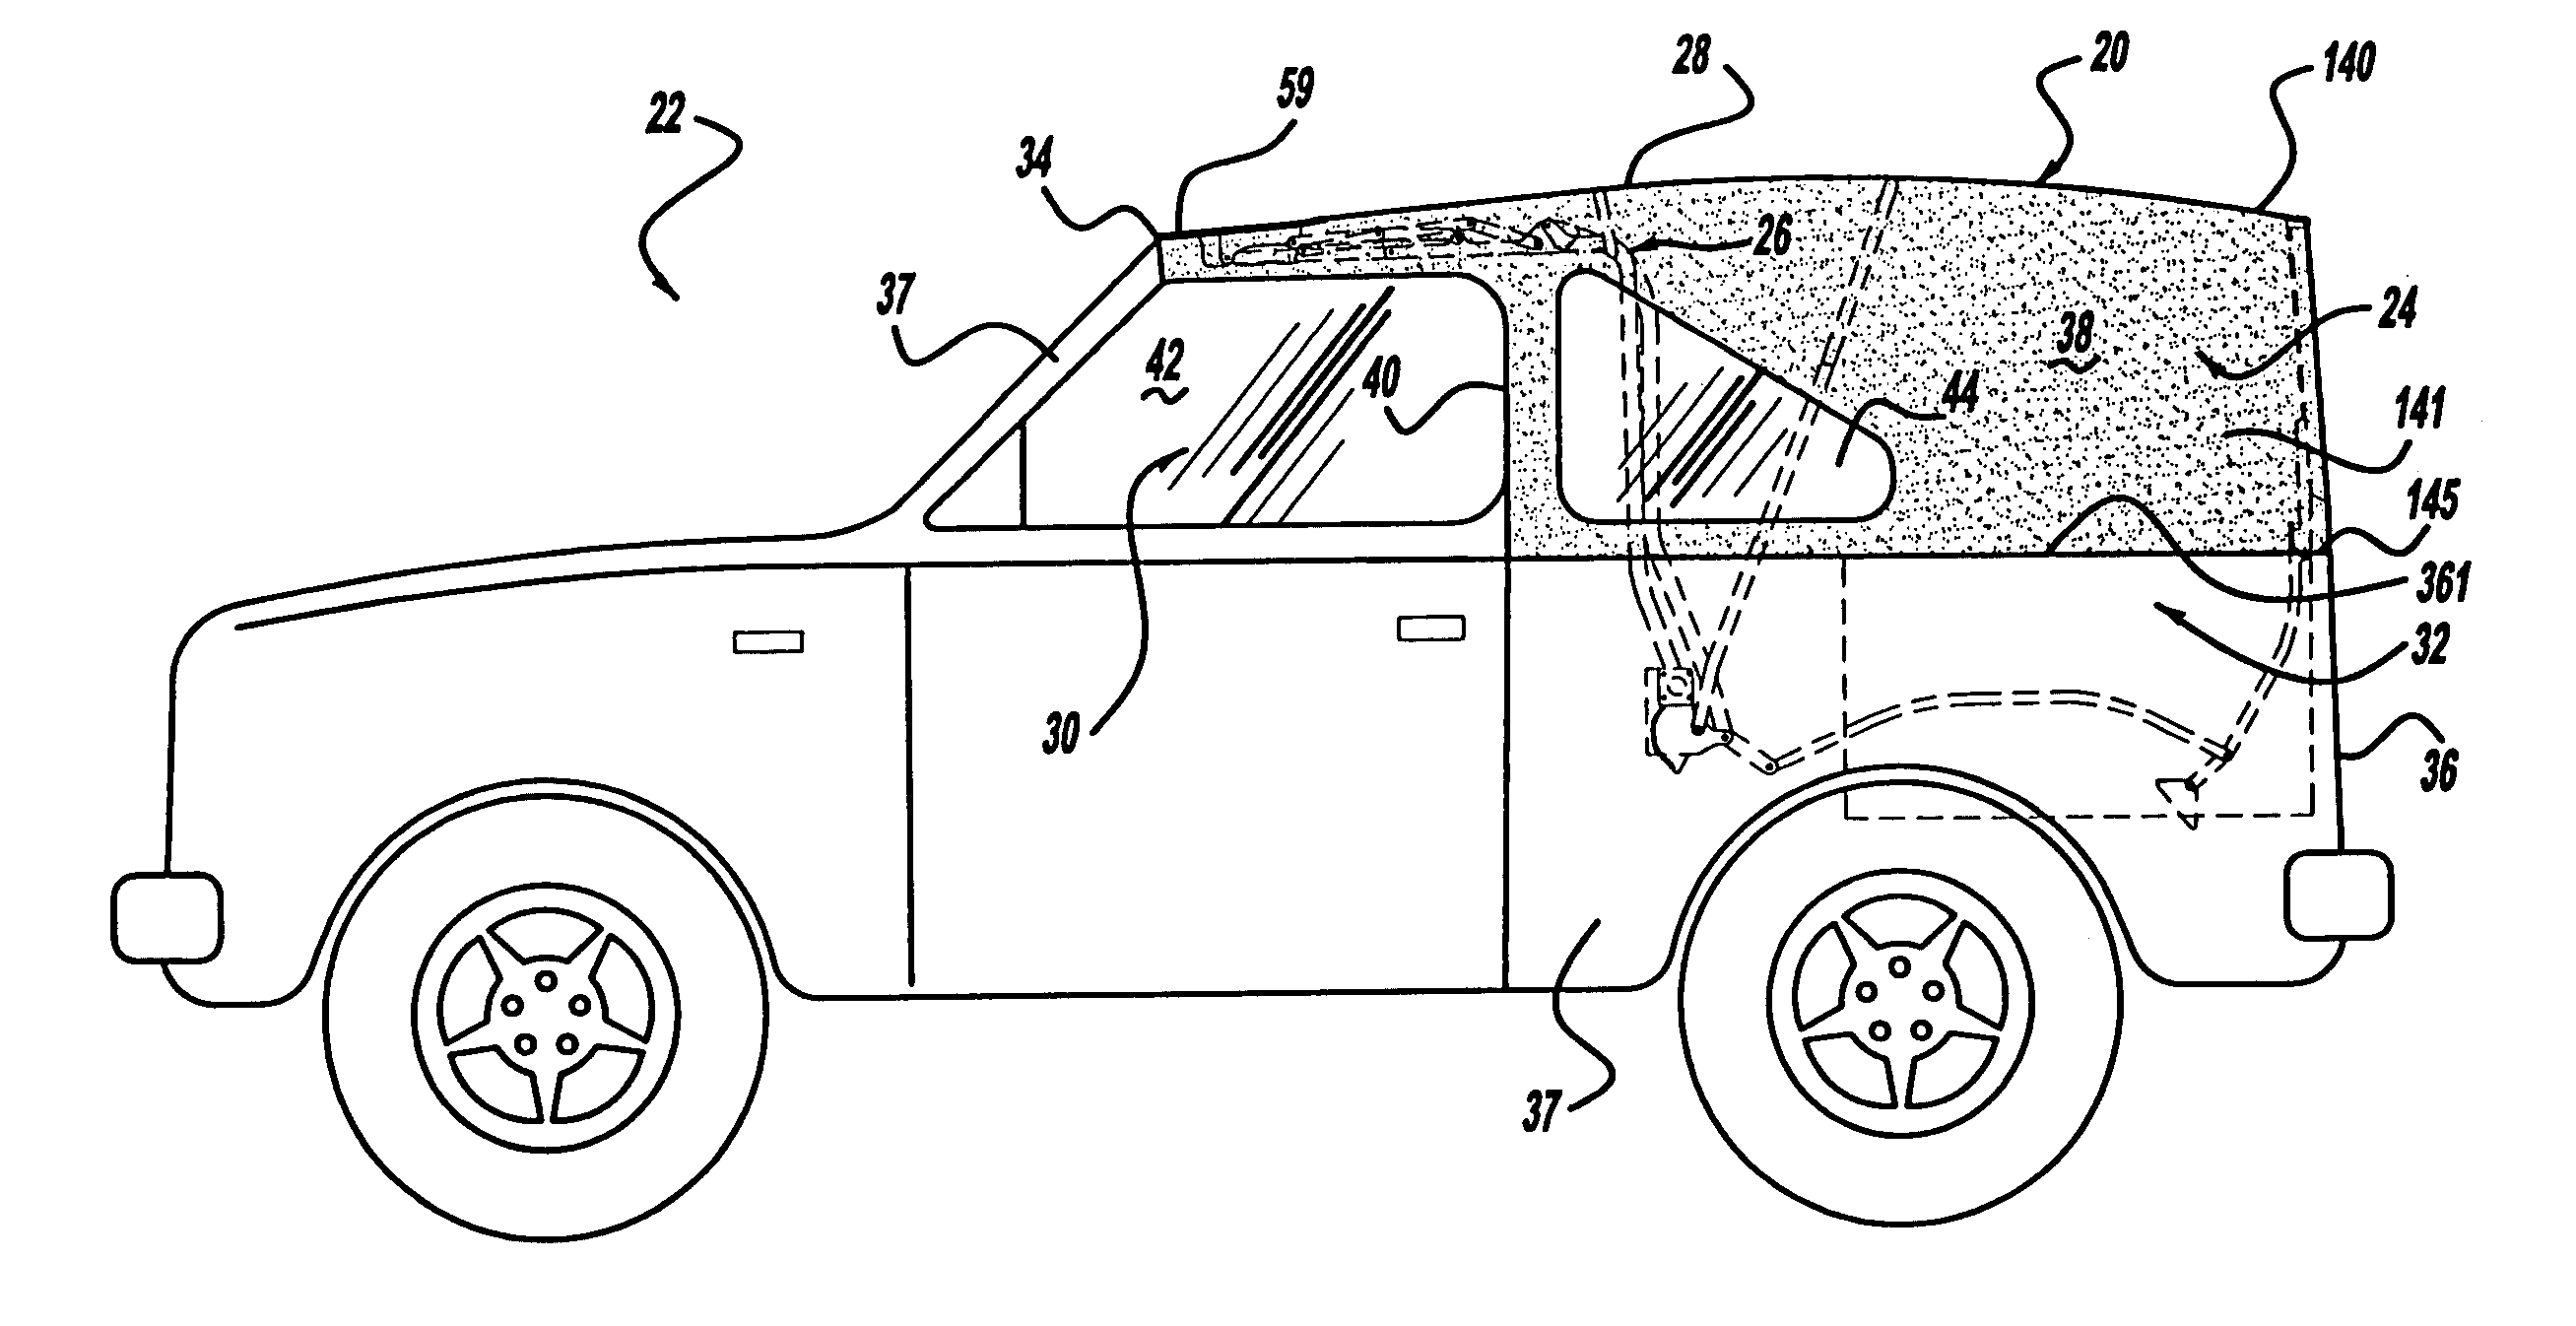 Soft-top convertible roof system for an automotive vehicle